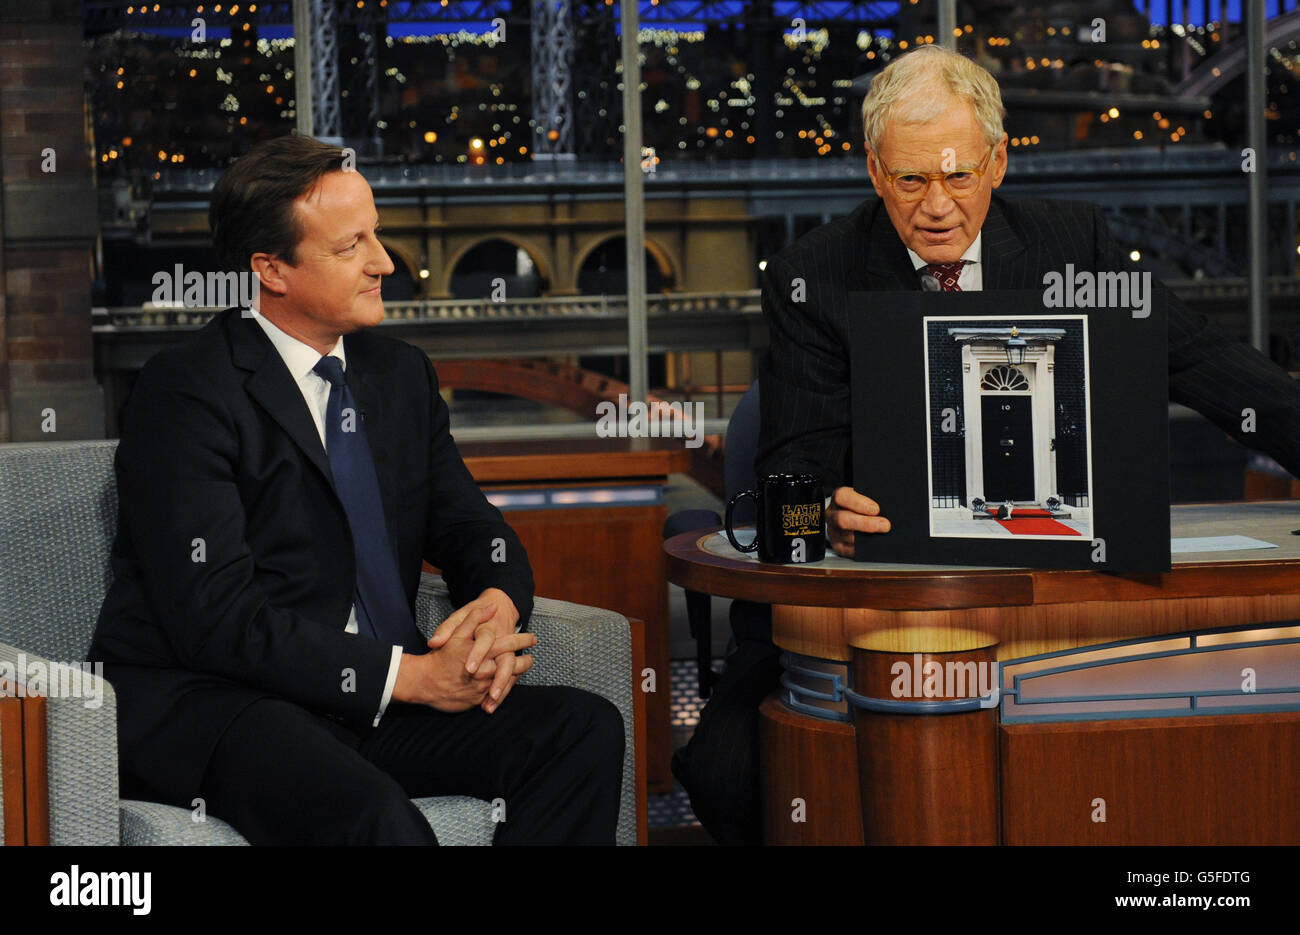 Prime Minister David Cameron (left) looks on as talk show host David Letterman, holds up a picture of Larry the cat sitting on red carpet outside the front door of 10 Downing Street, during the David Letterman Show in New York, after he addressed the United Nations General Assembly. Stock Photo